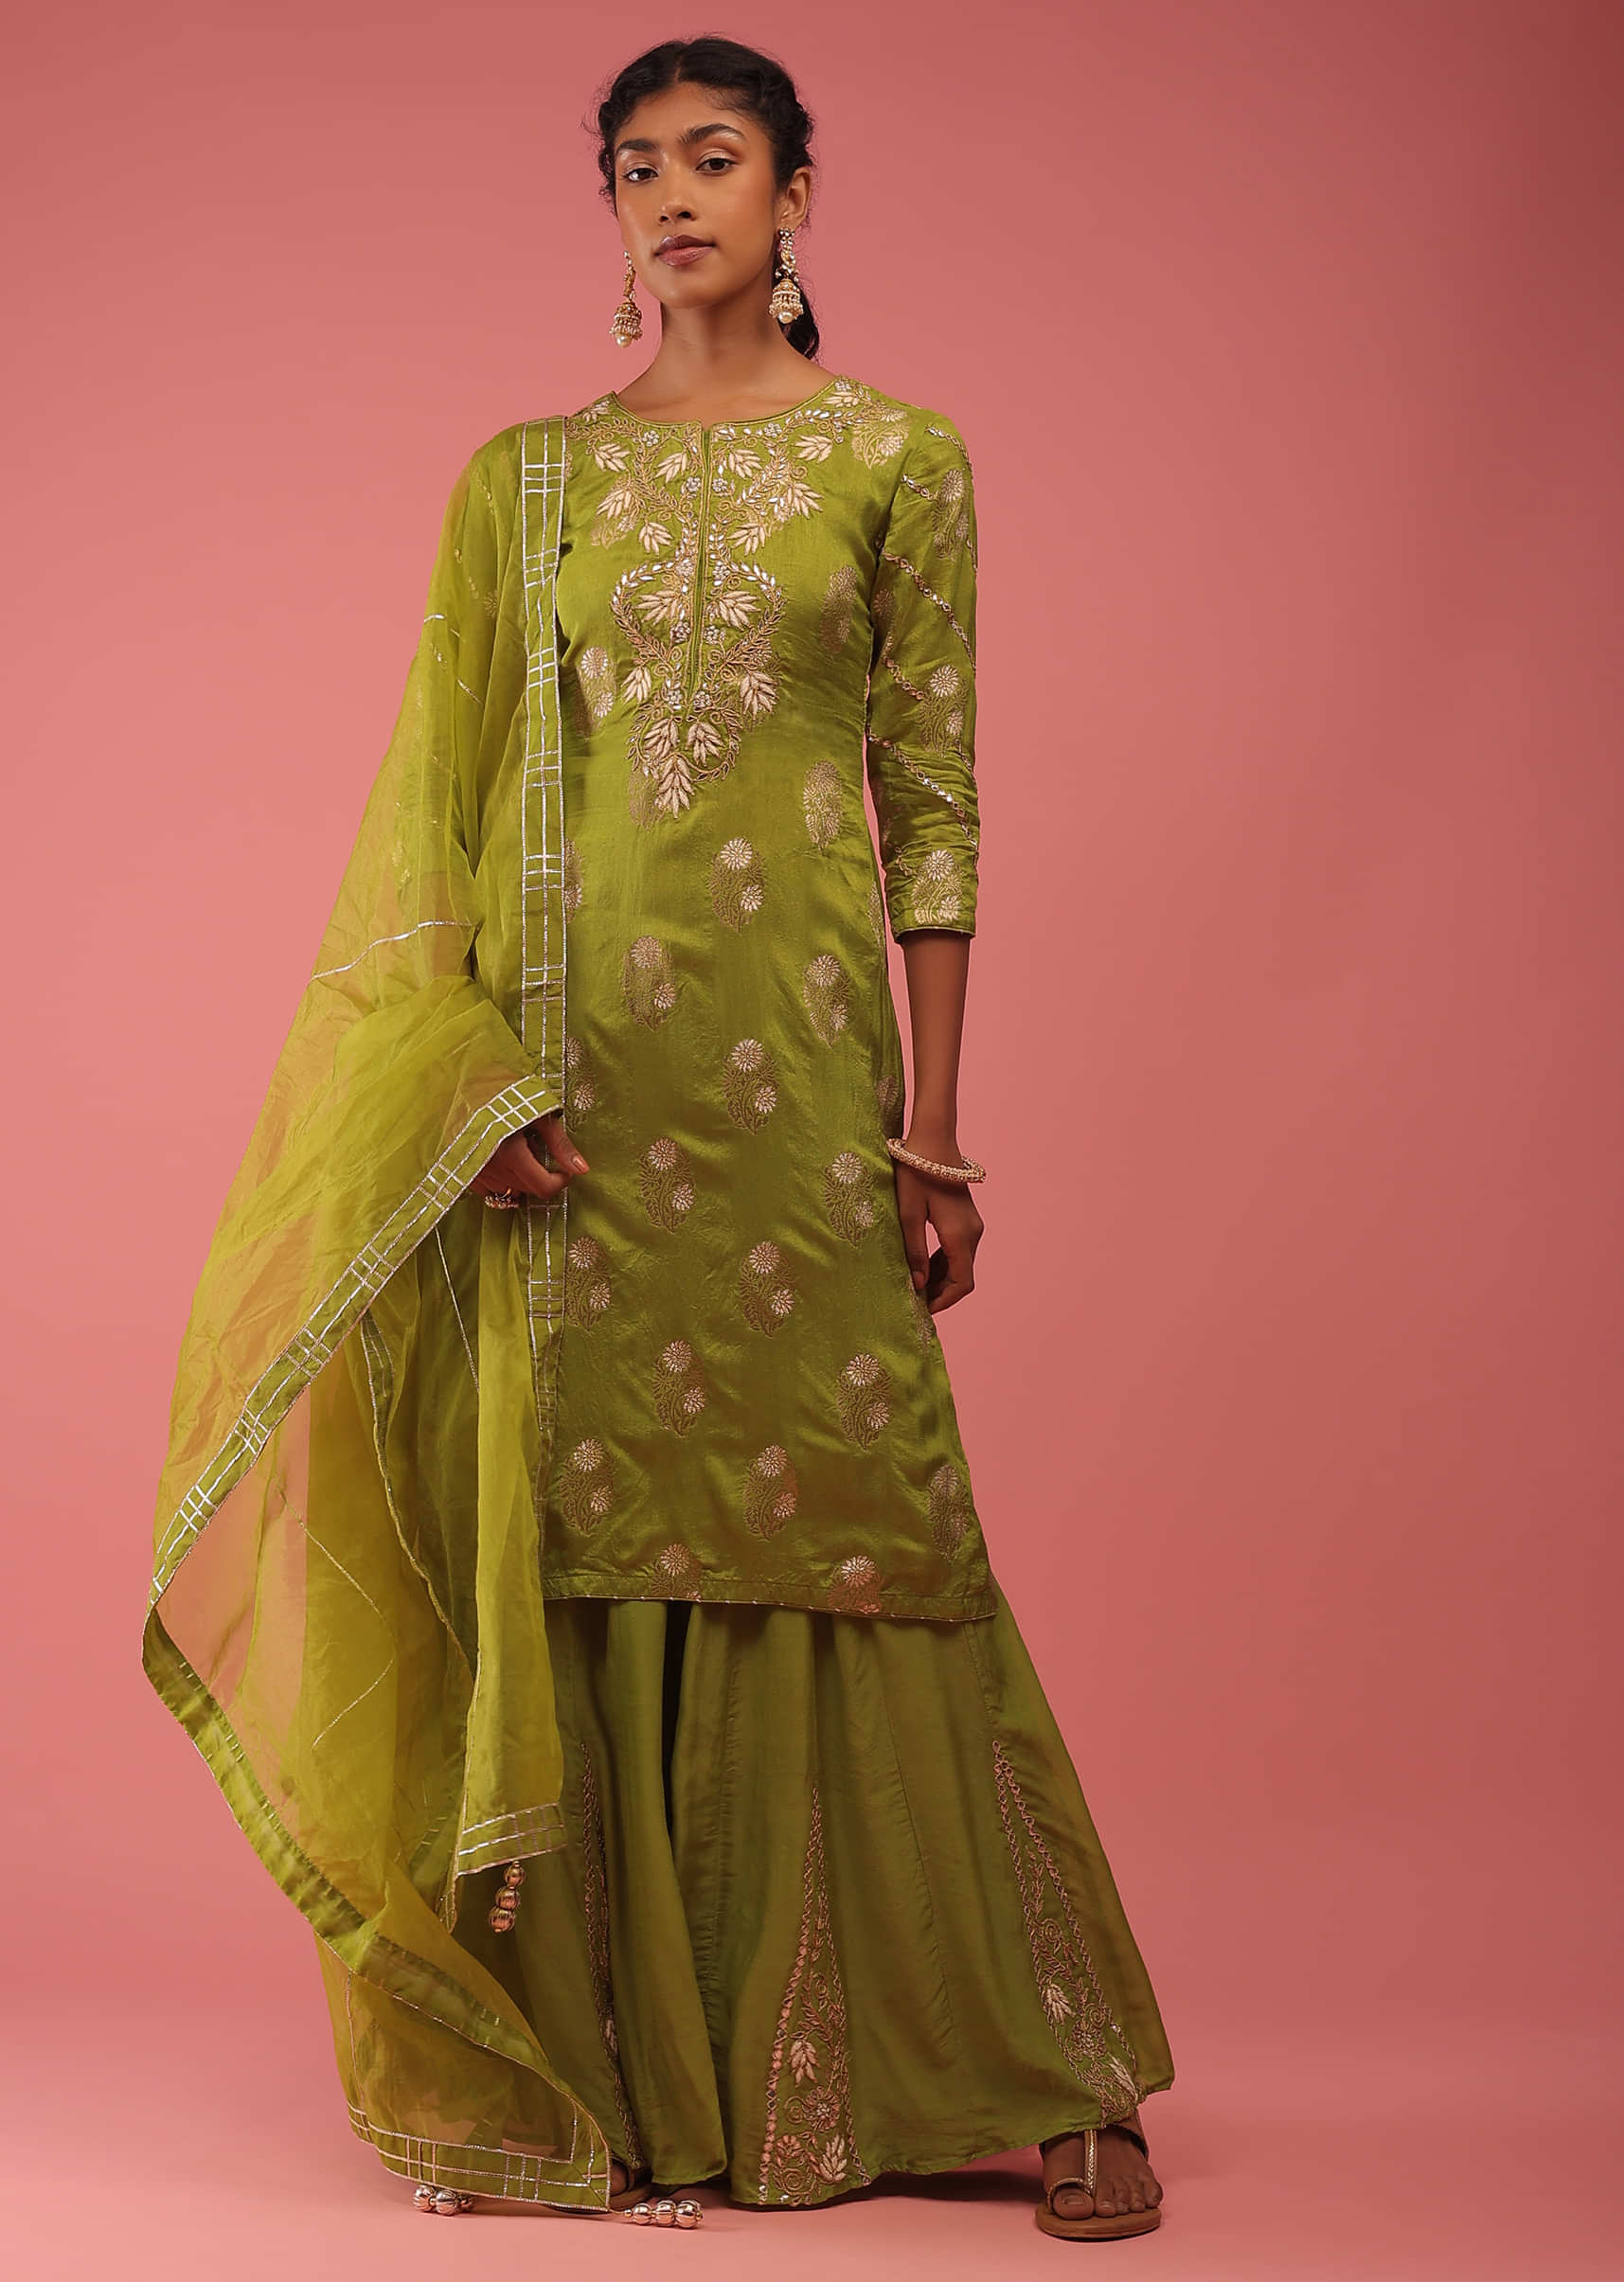 Palm Green Sharara Suit In Golden Zari Embroidery, Crafted In Cotton With Front Hooks Closure On The Yoke